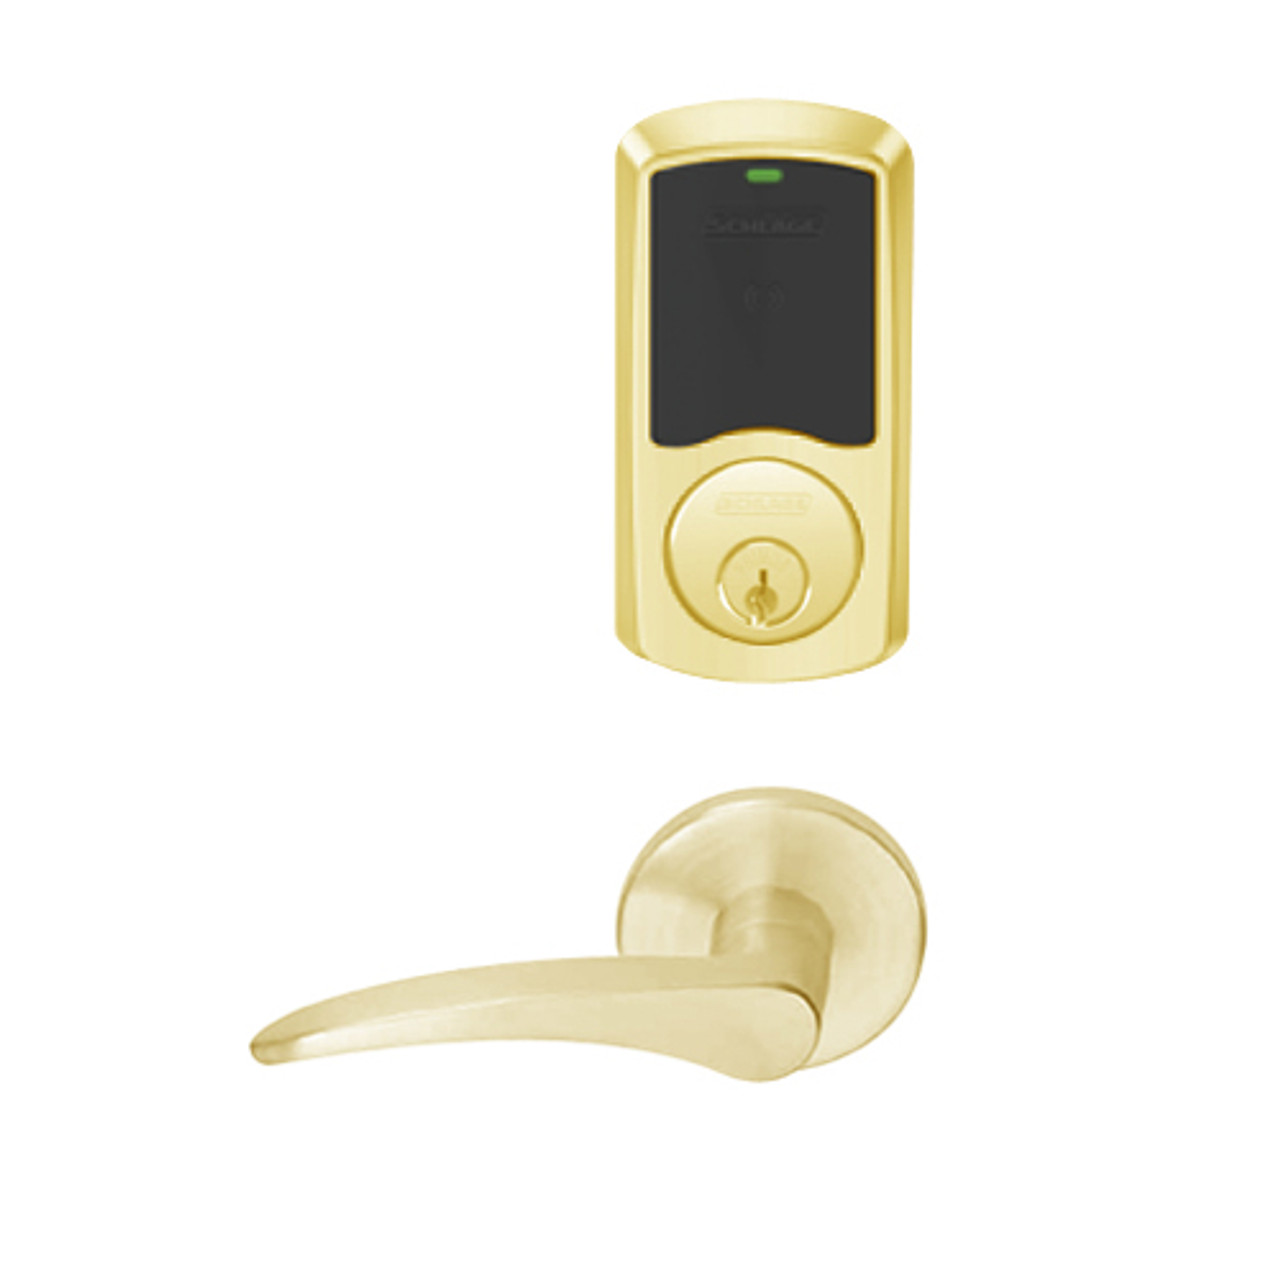 LEMD-GRW-P-12-605-00C-RH Schlage Privacy/Apartment Wireless Greenwich Mortise Deadbolt Lock with LED and 12 Lever in Bright Brass